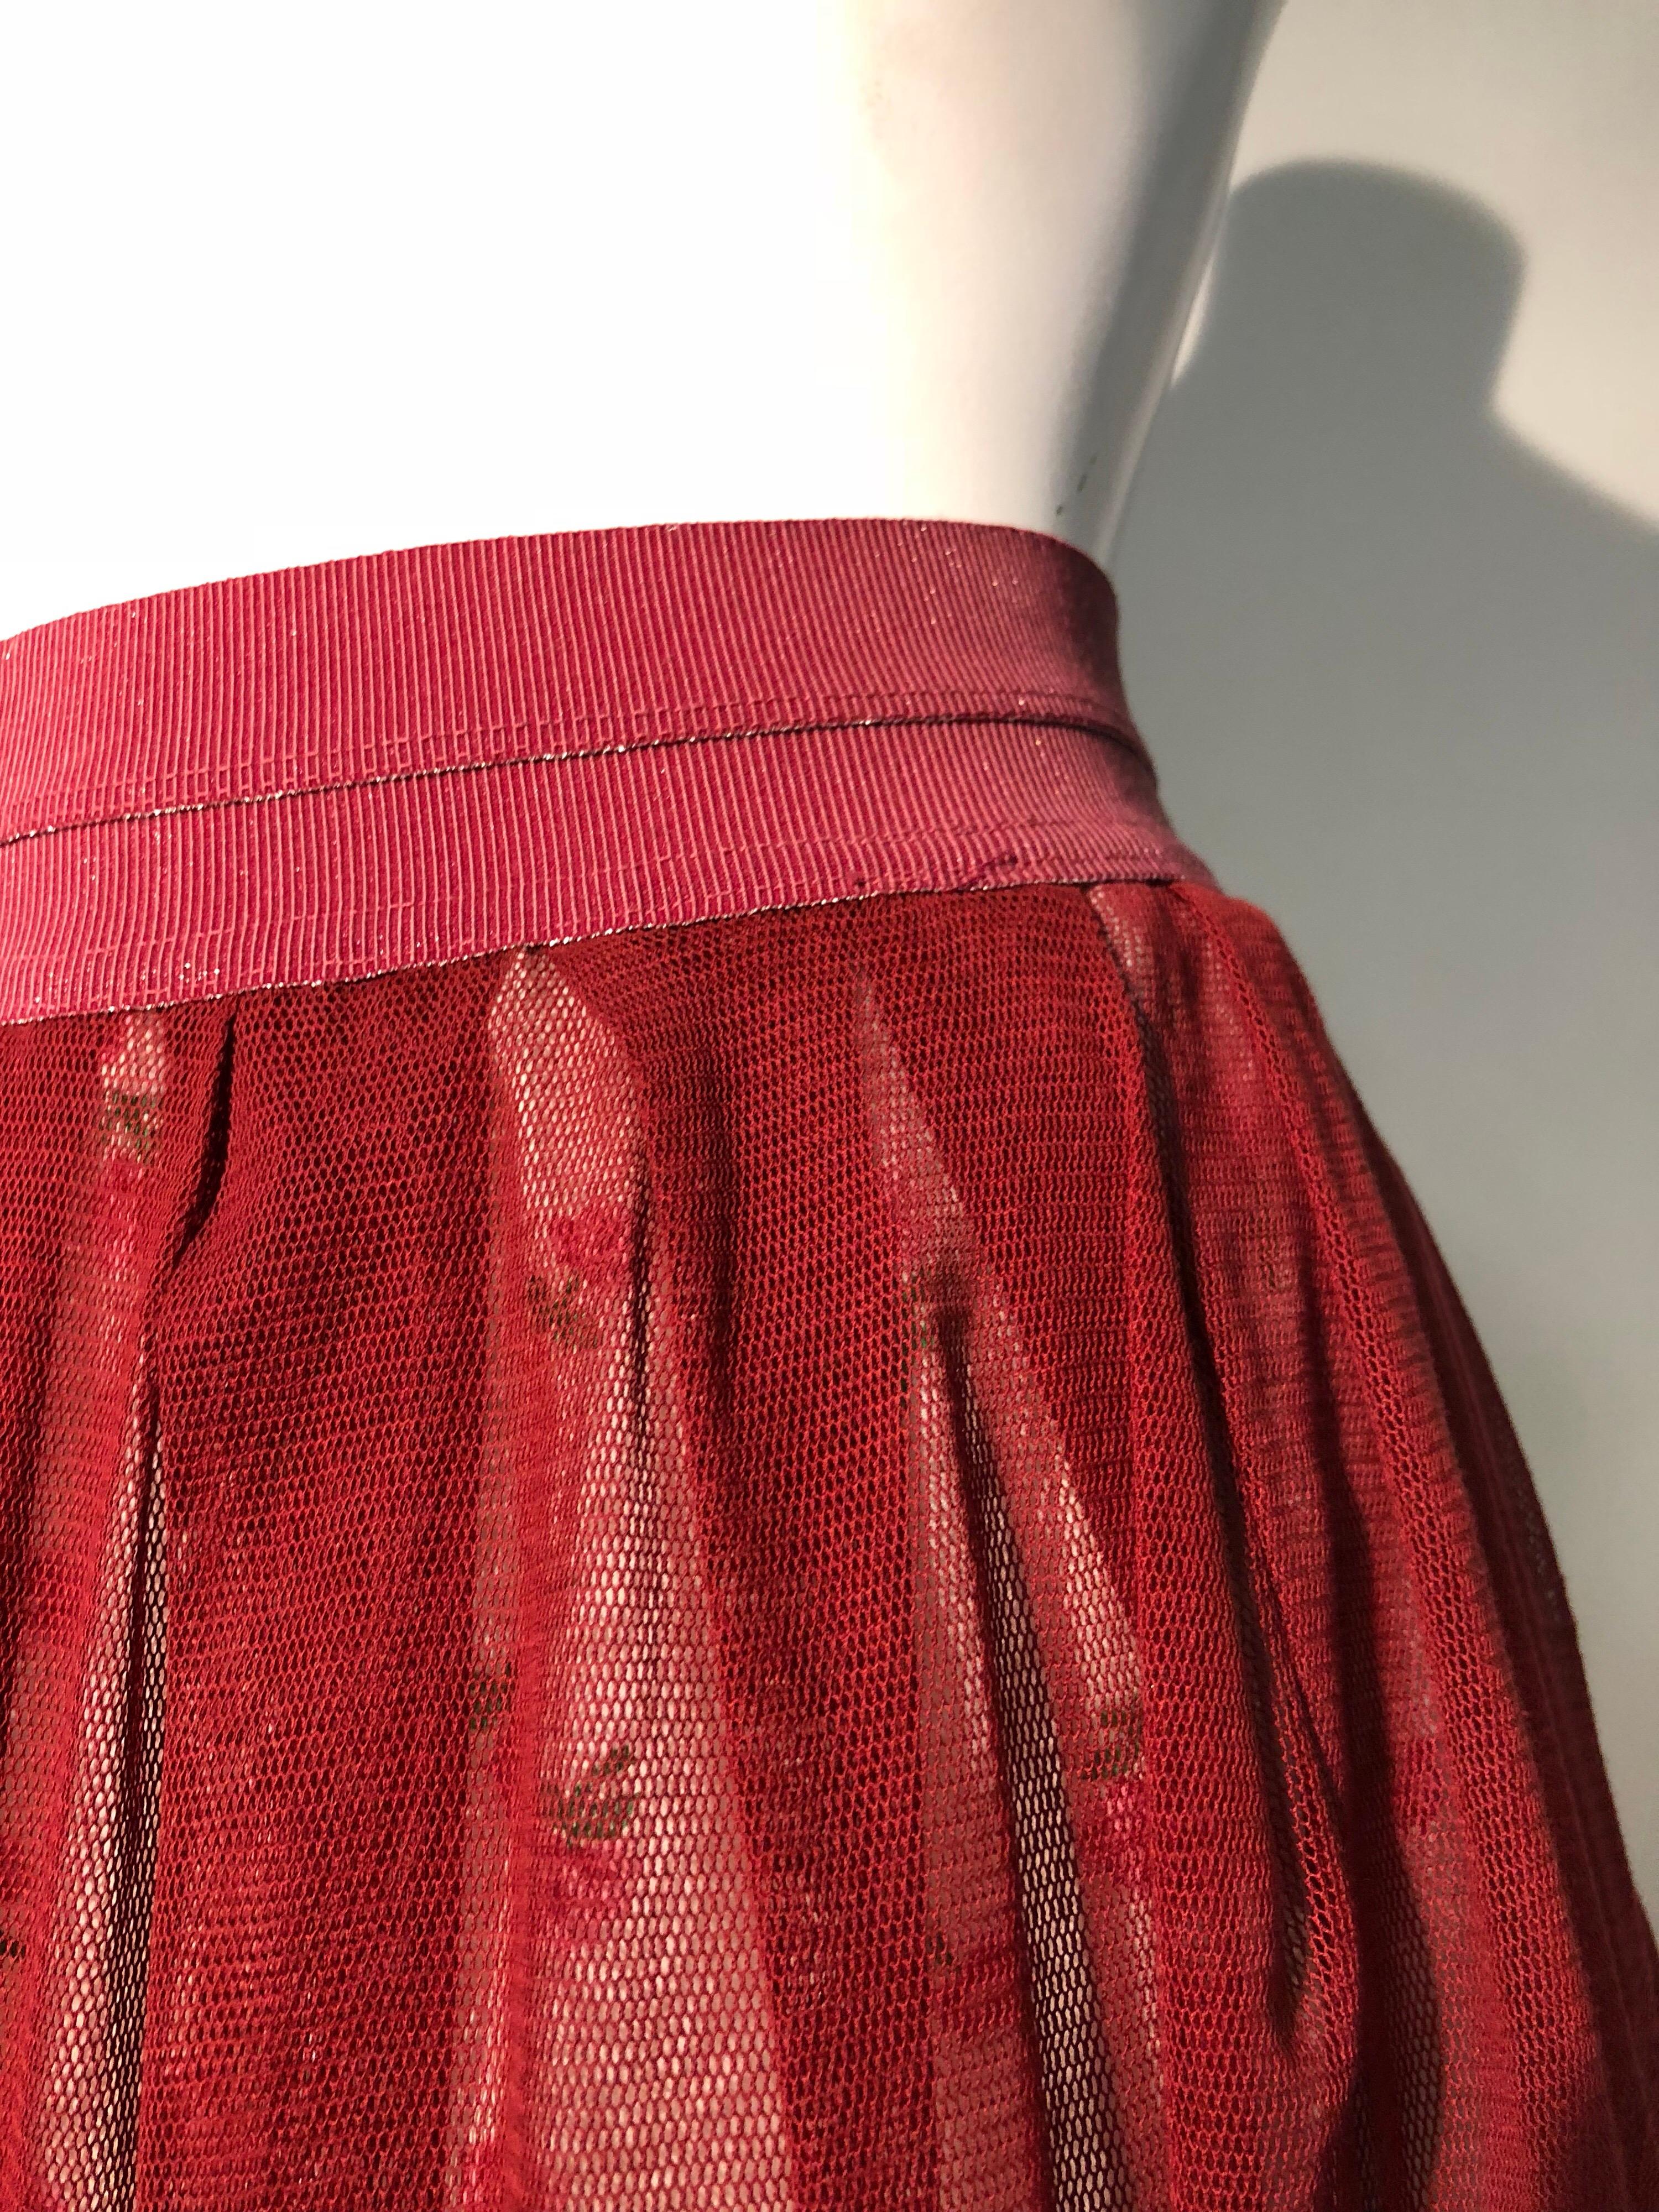 A beautiful reconstructed Torso Creations multi-layer petticoat skirt. Fashioned from multiple layers of vintage burgundy tulle and rose floral print, it has been fitted with a wide burgundy elastic waist, and is ready to wear on the town!